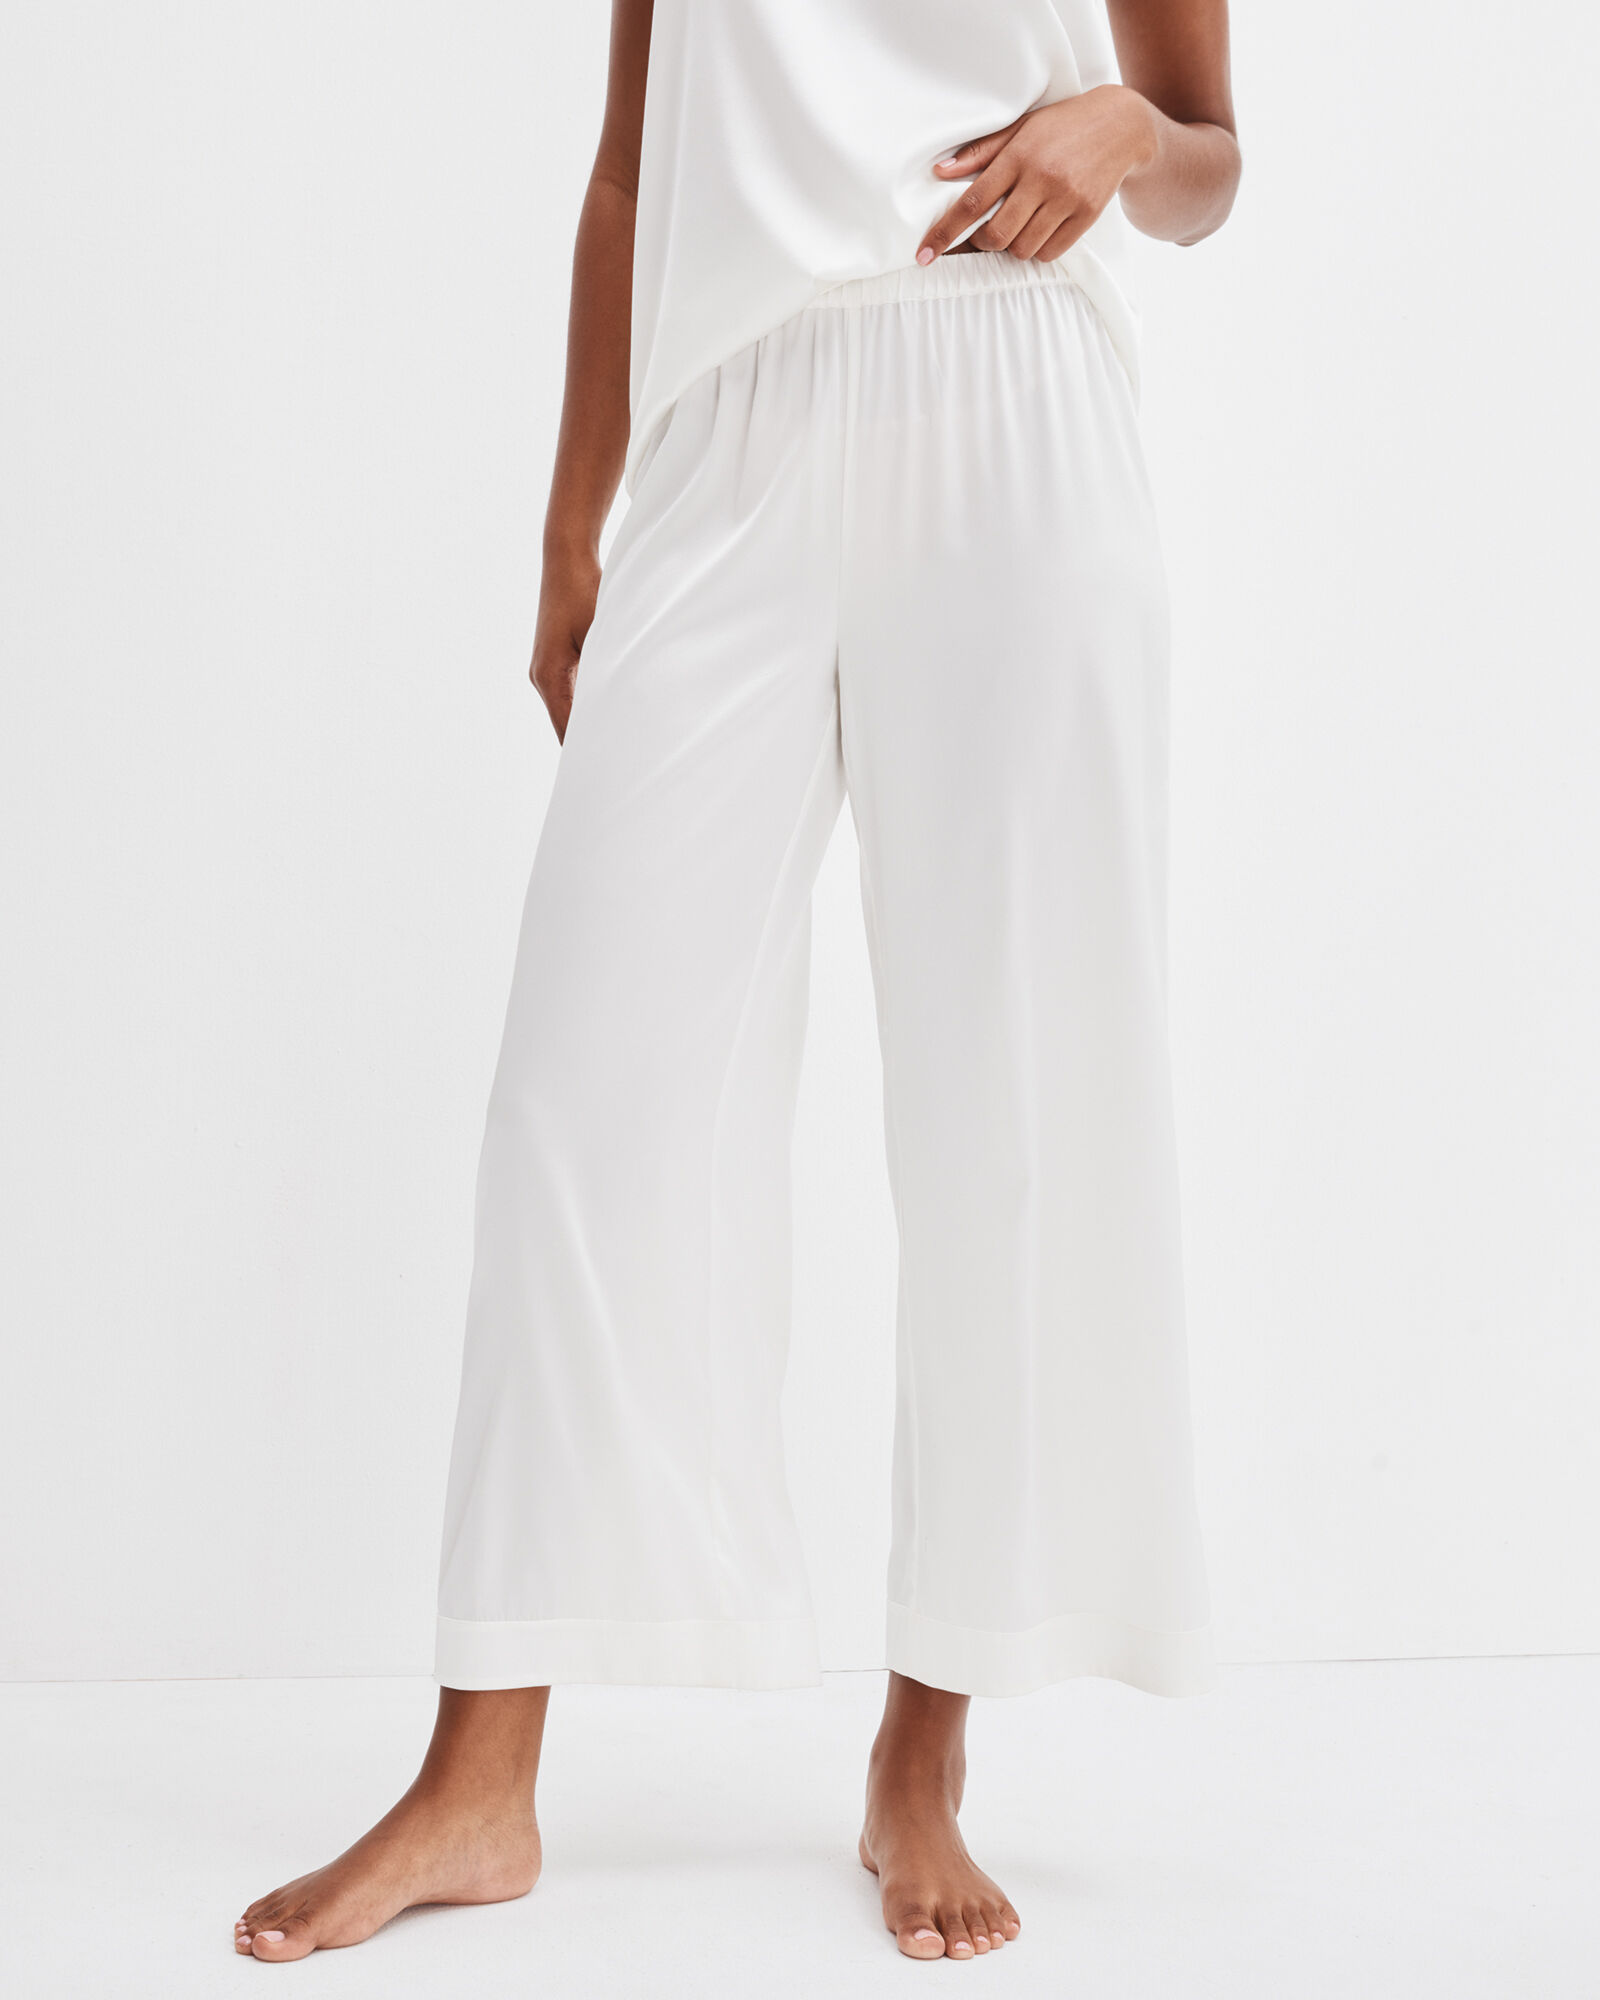 not mad about pants weather in the Washable Silk Long Sleeve Pant Set. cc  @meganmtl